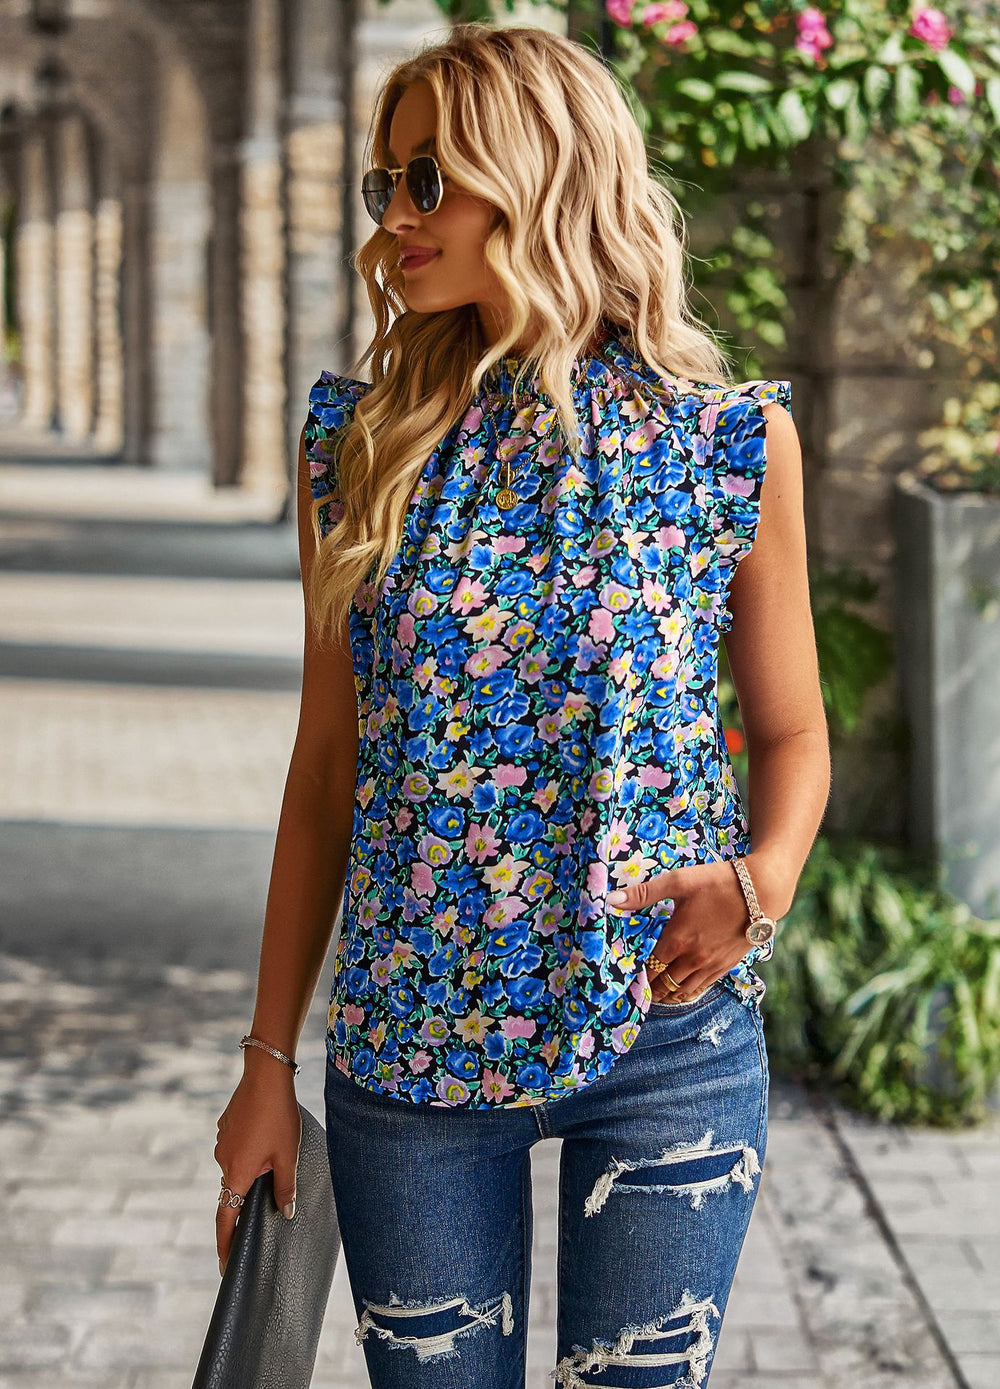 Women Clothing Loose Casual Top Spring Sleeveless Floral Shirt